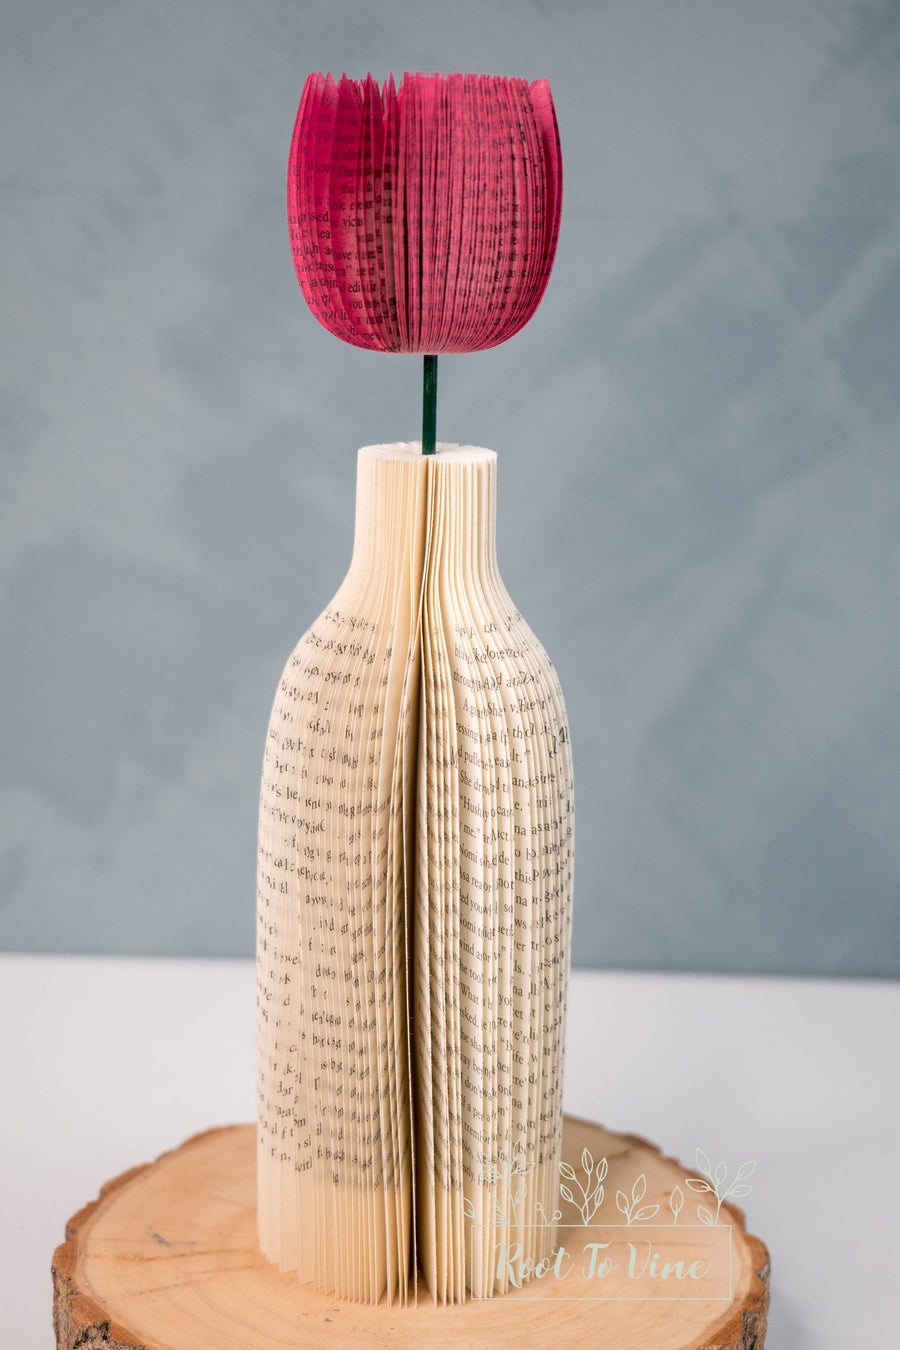 Book Flower and Vase